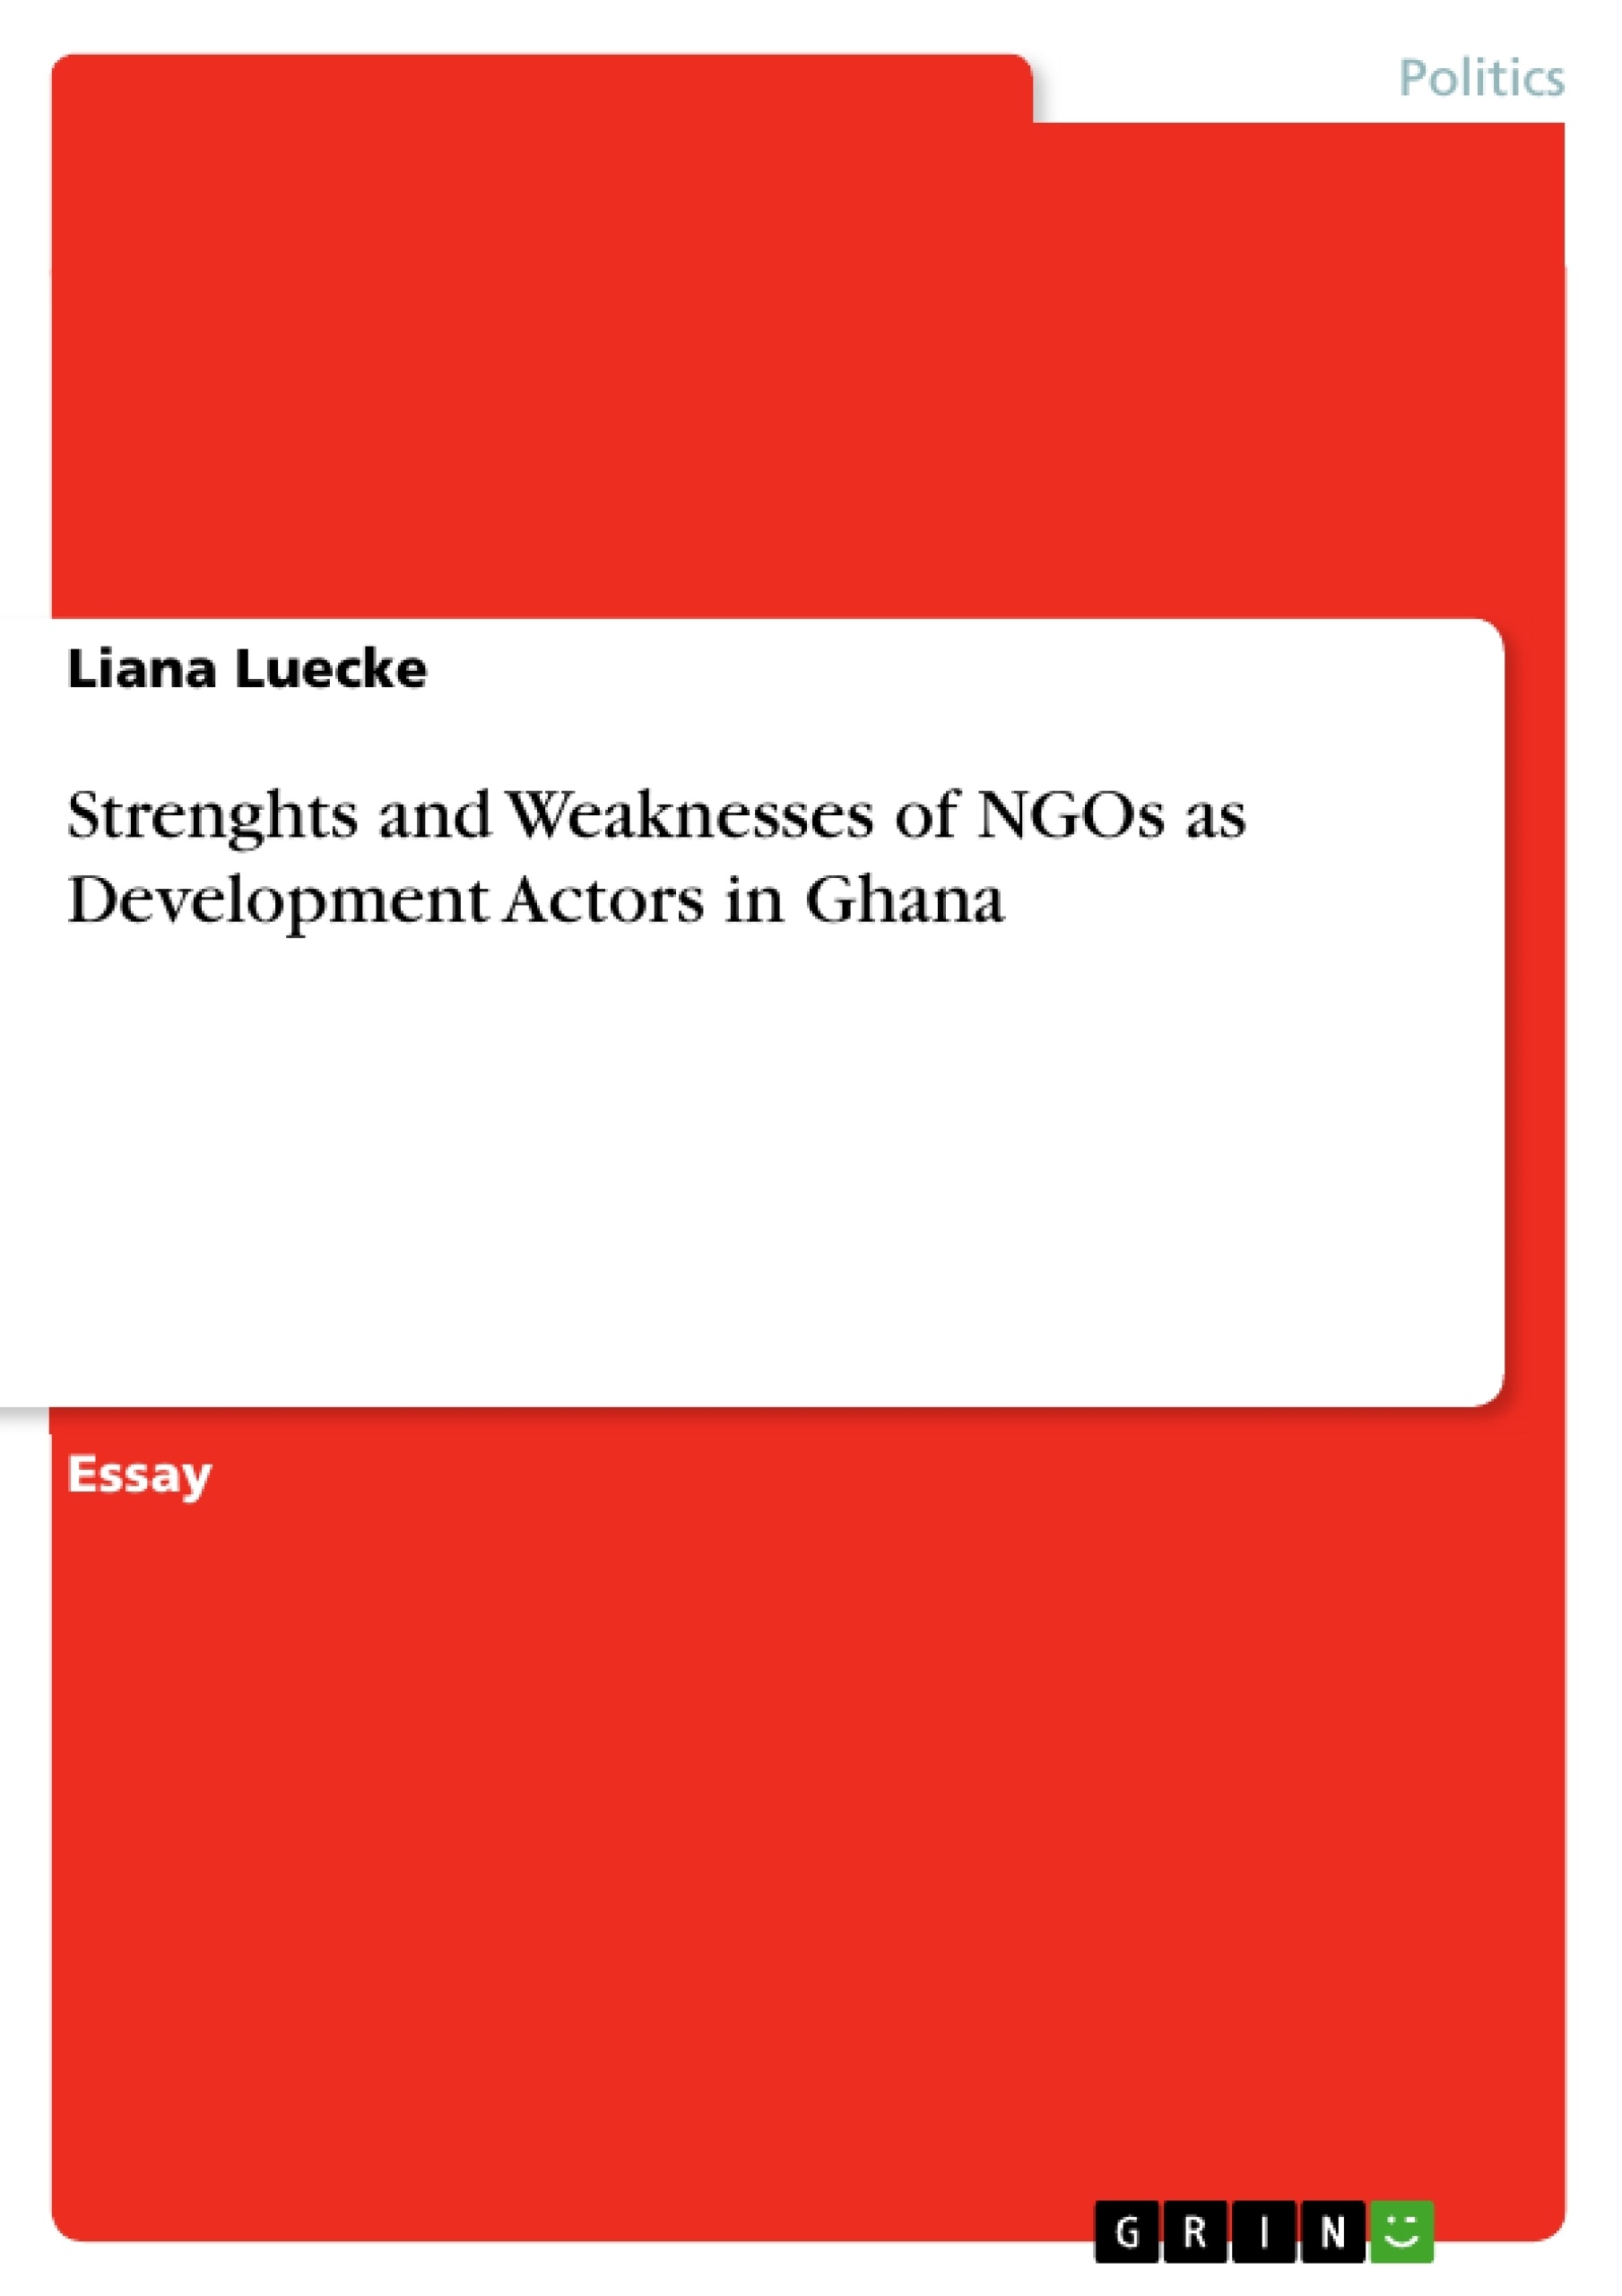 Title: Strenghts and Weaknesses of NGOs as Development Actors in Ghana